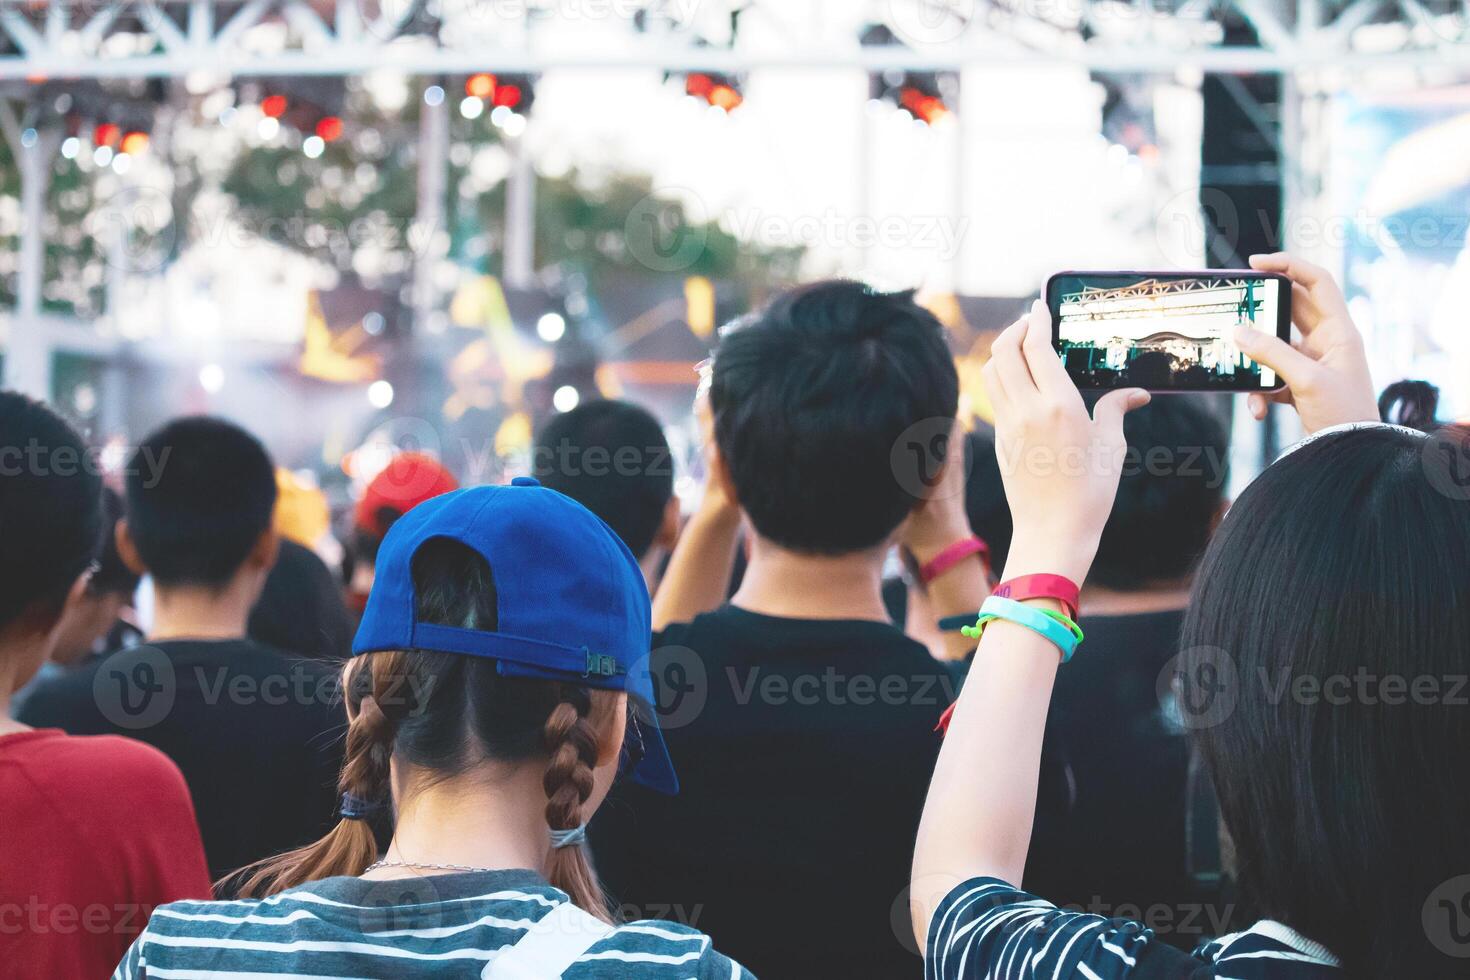 Hand with a smartphone records live music festival, Taking photo of concert stage, live concert, music festival